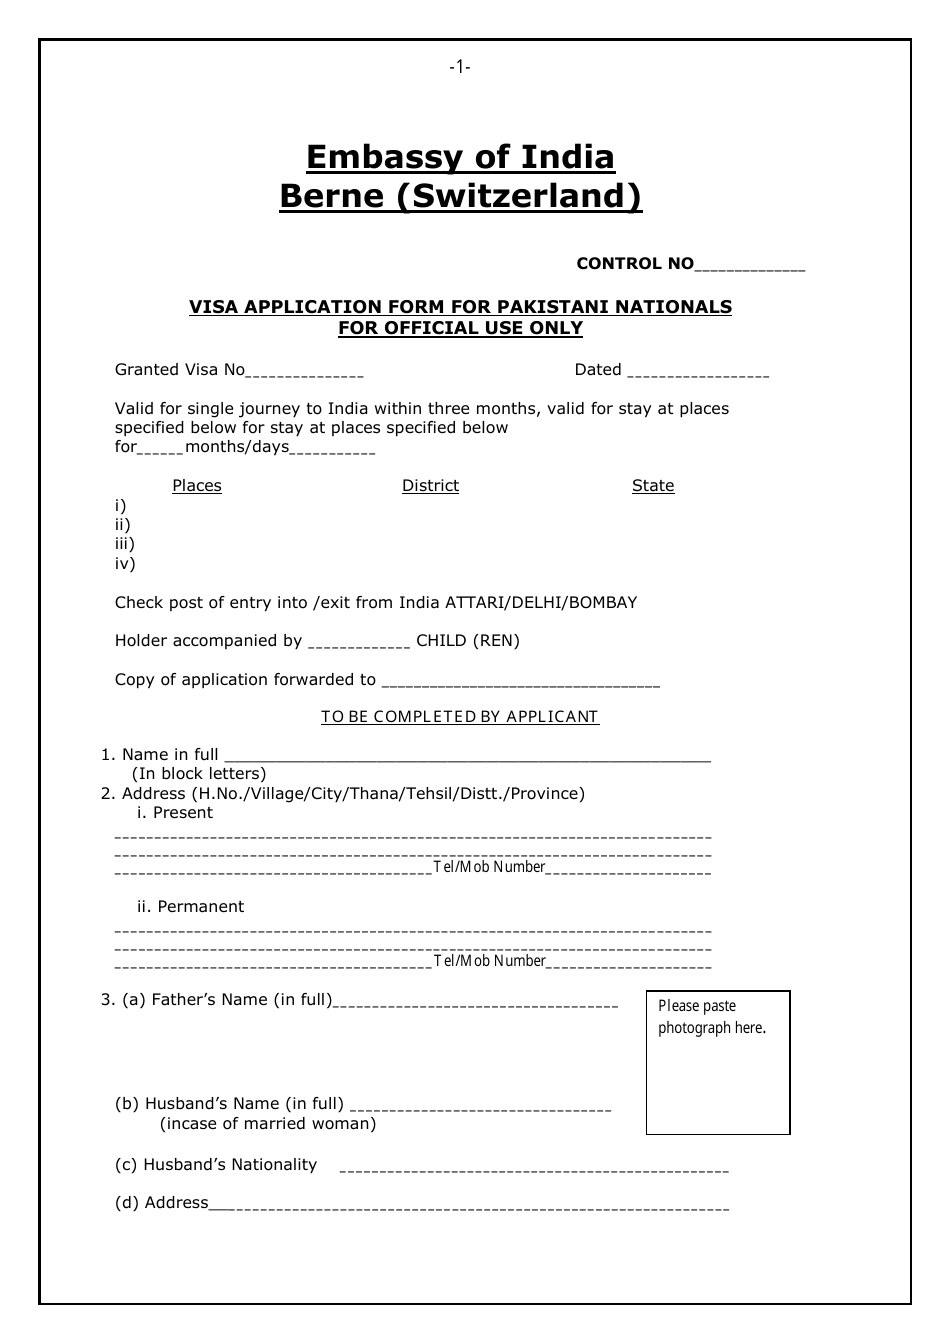 Indian Visa Application Form for Pakistani Nationals - Embassy of India - Canton of Bern, Switzerland, Page 1